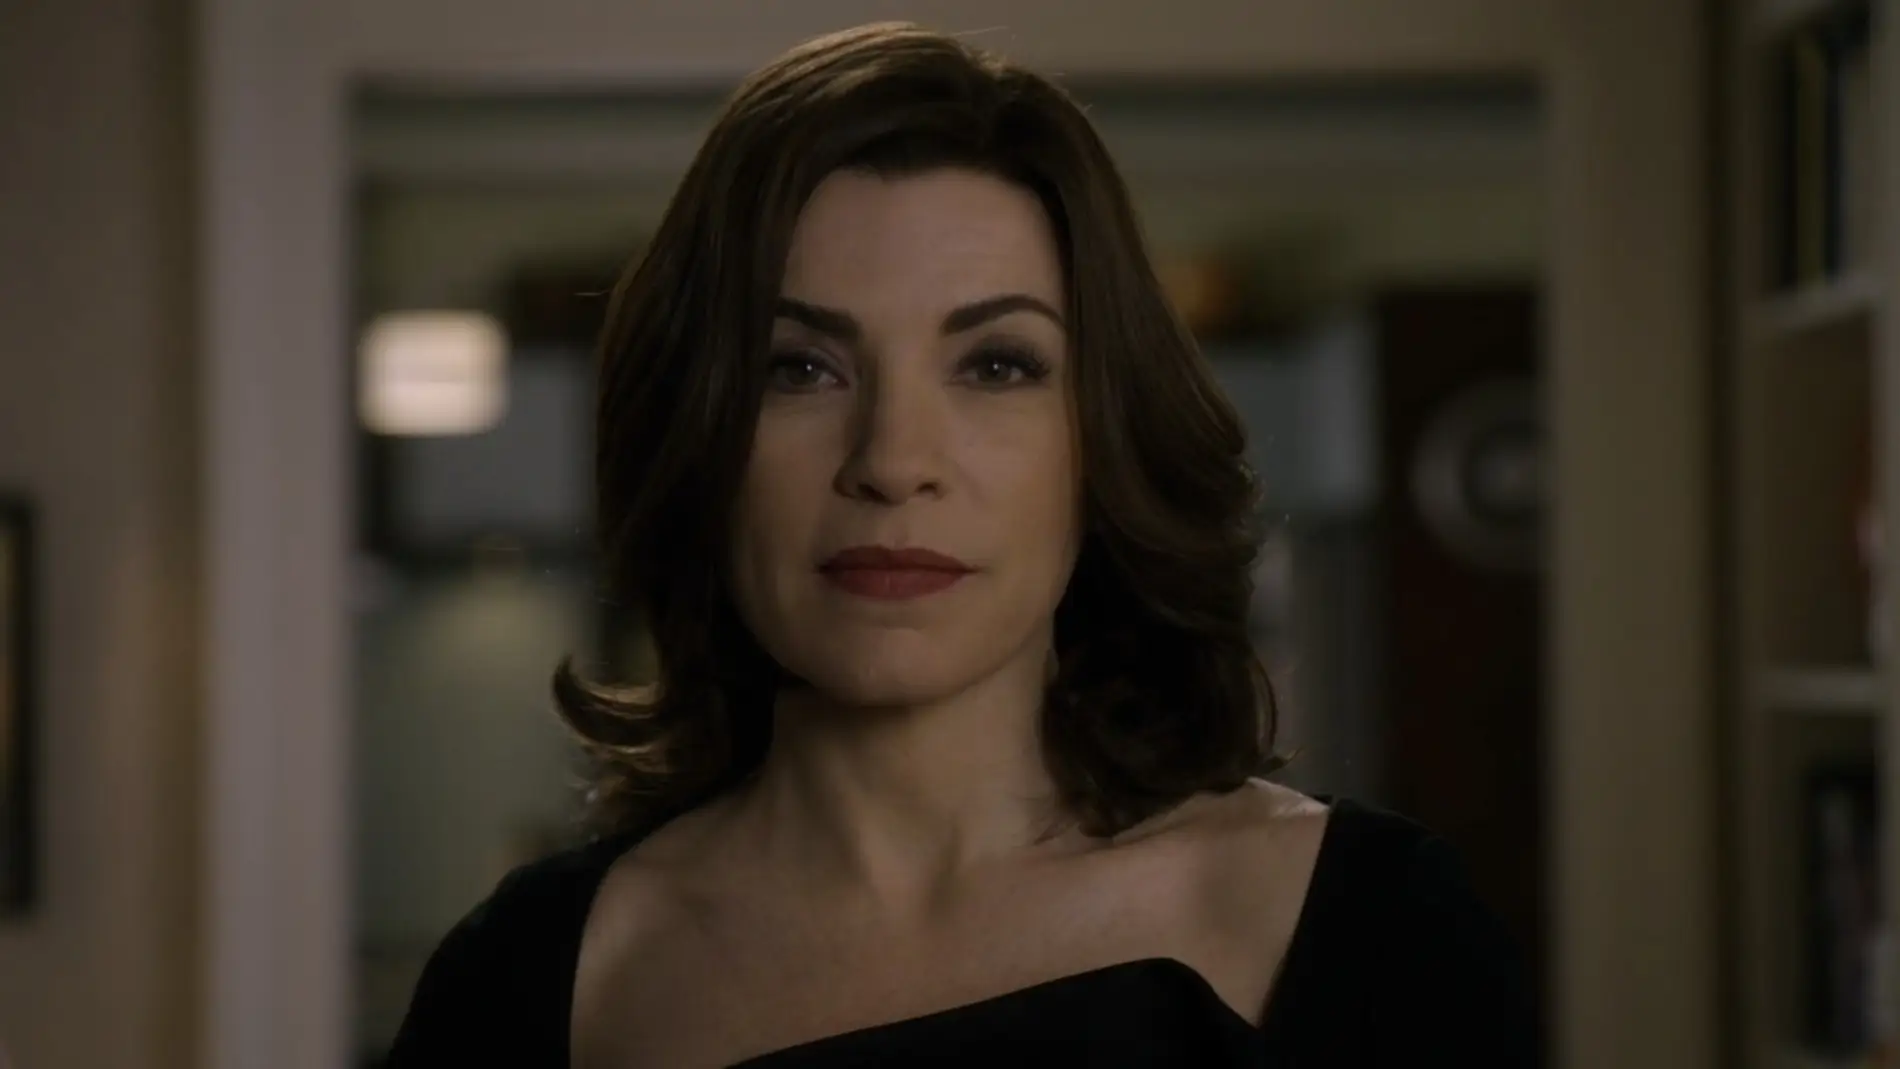 'The Good Wife'